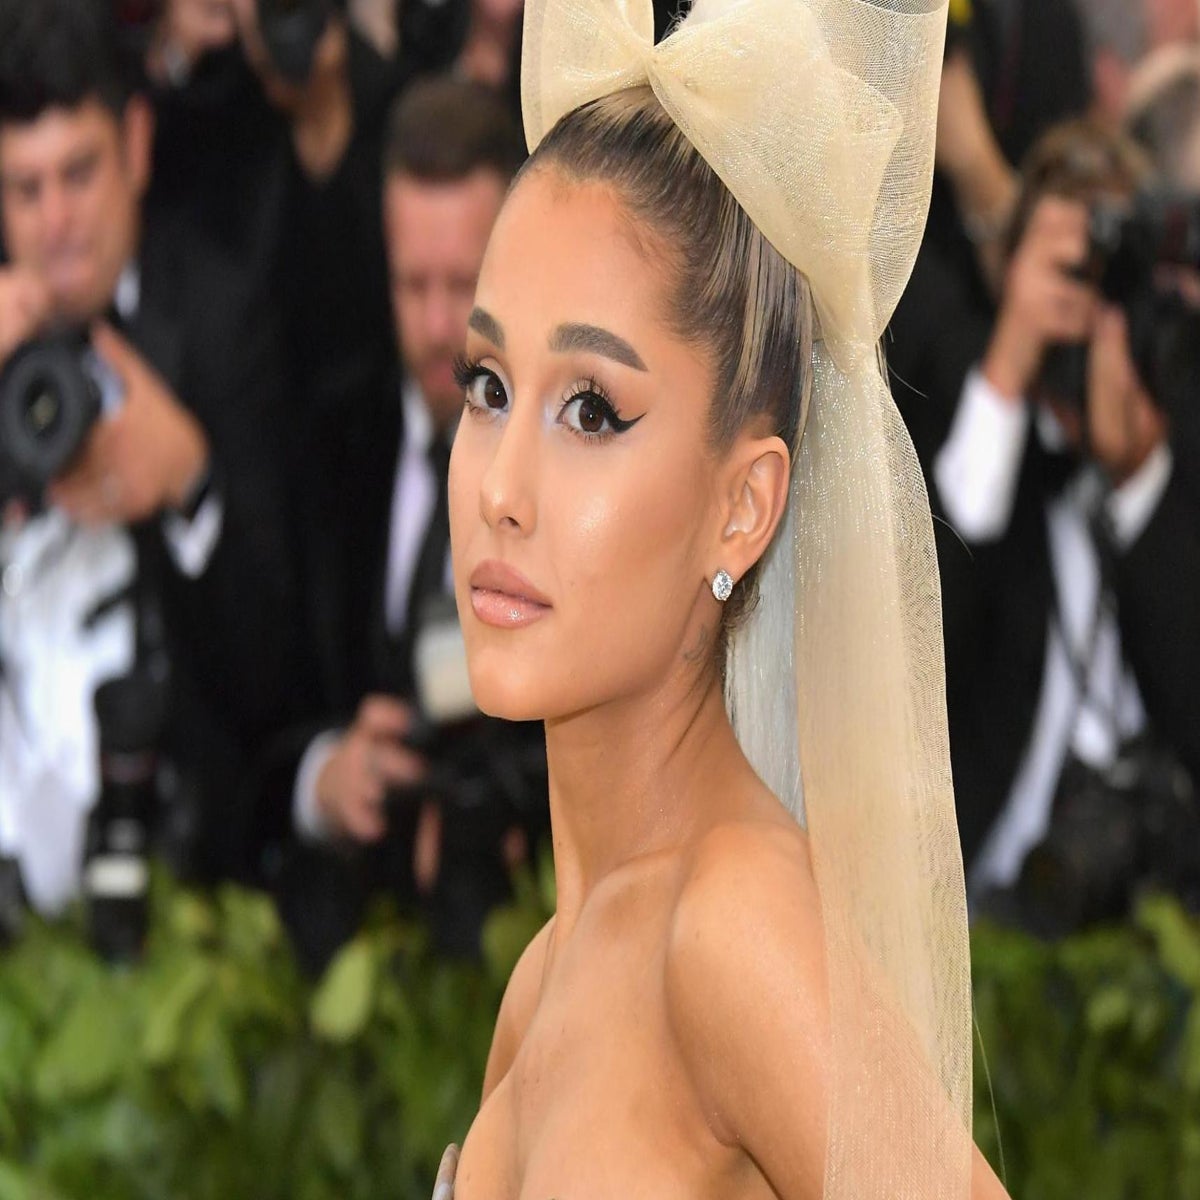 Ariana Grande cuts a stylish figure as she touches down in Japan